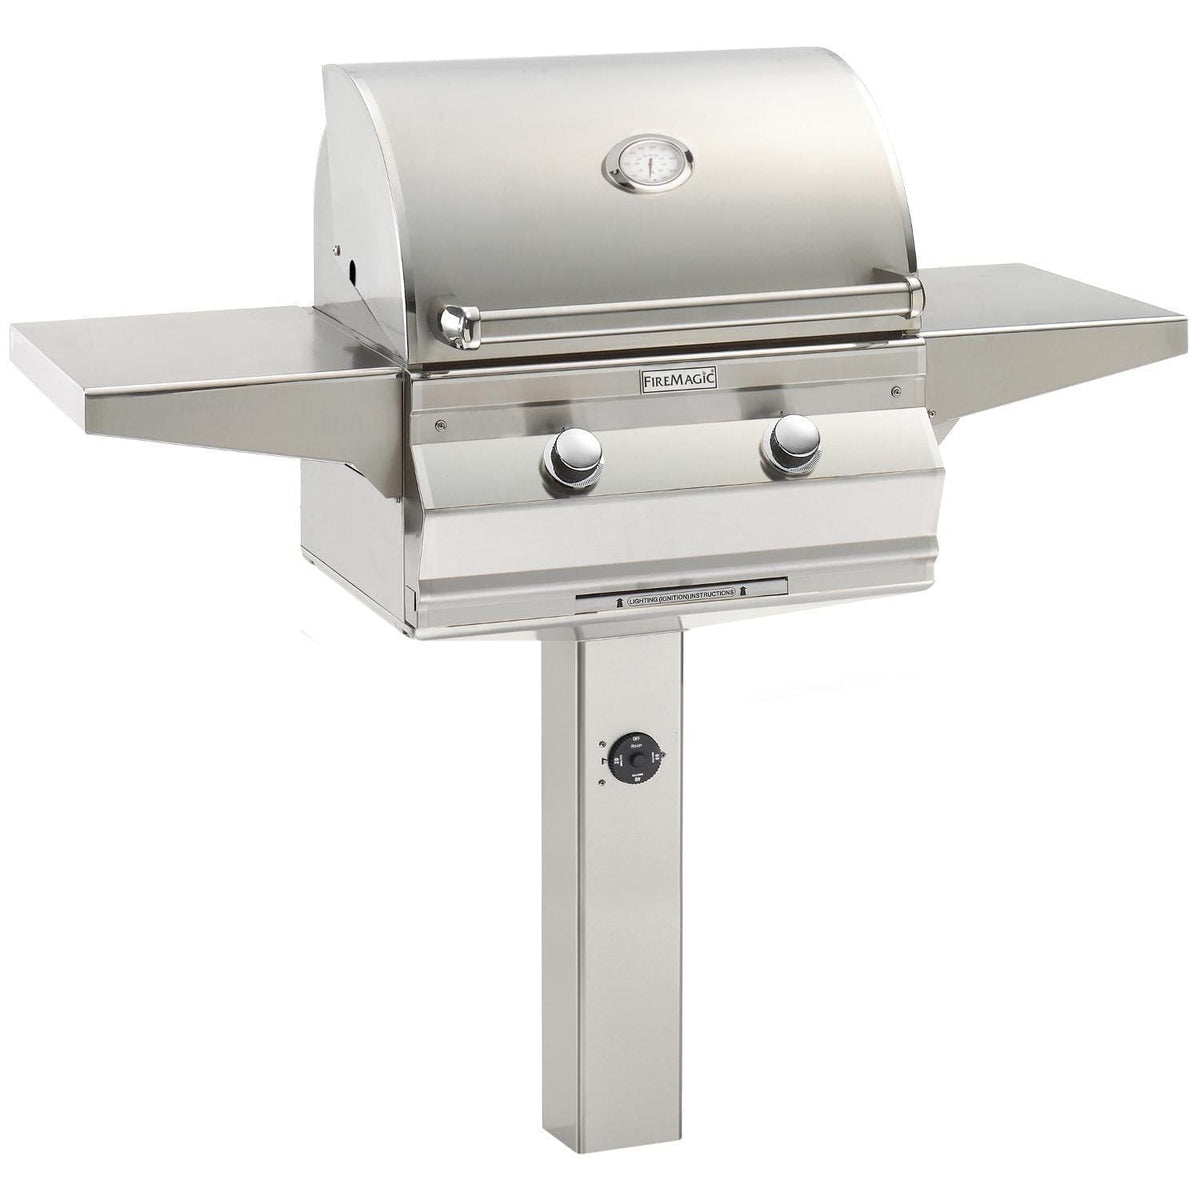 Firemagic Grills Fire Magic Choice C430S 24-Inch Gas Grill With Analog Thermometer On In-Ground Post - C430S-RT1-G6